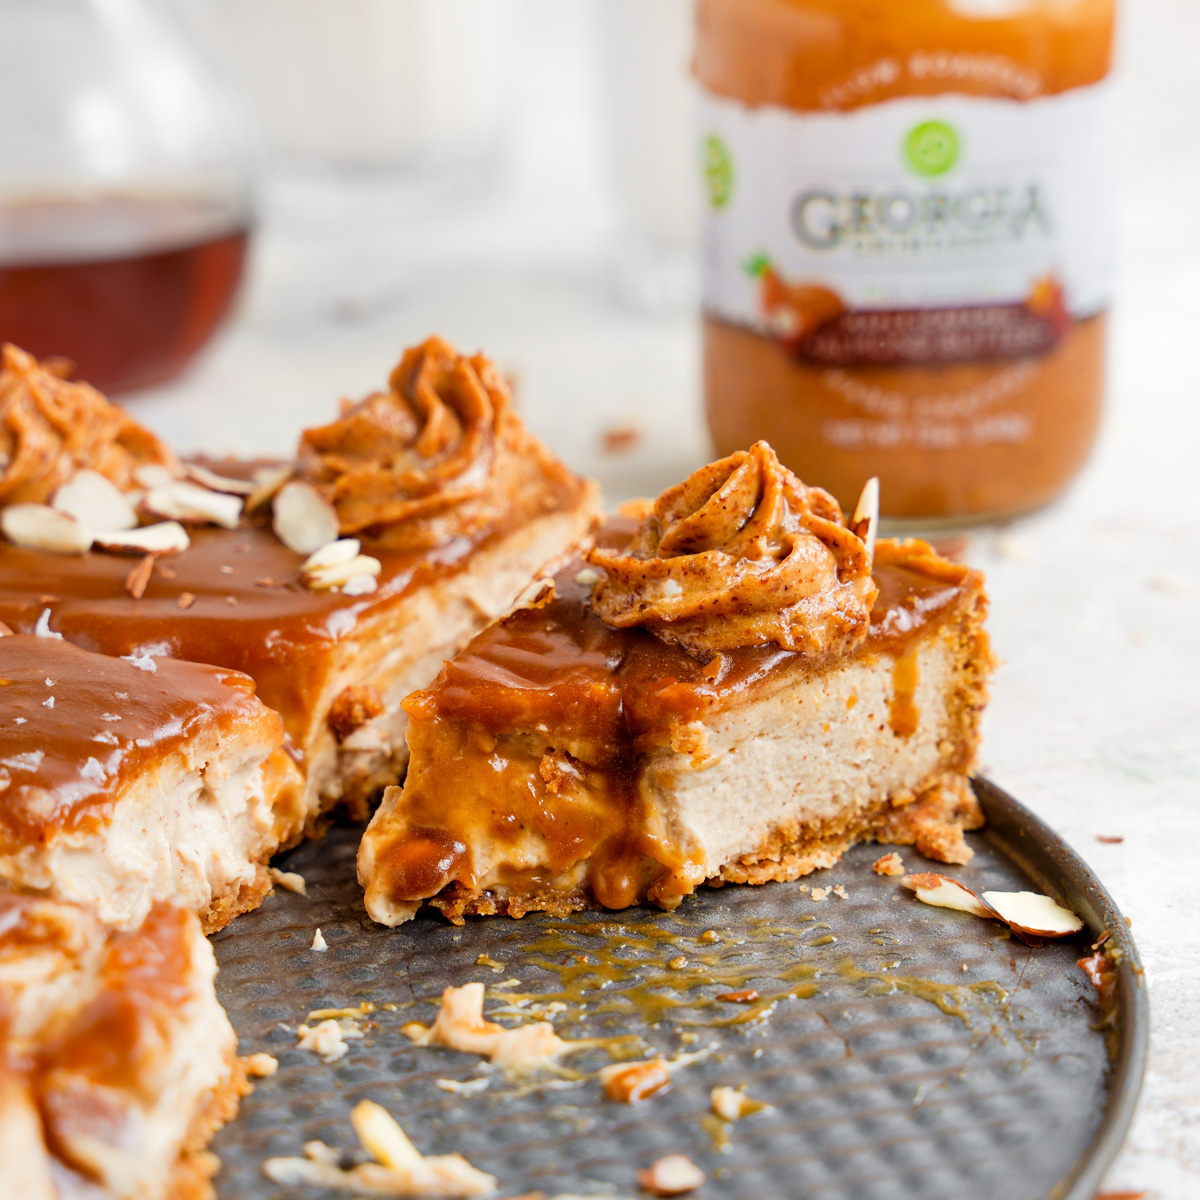 maple caramel almond cheesecake featured image